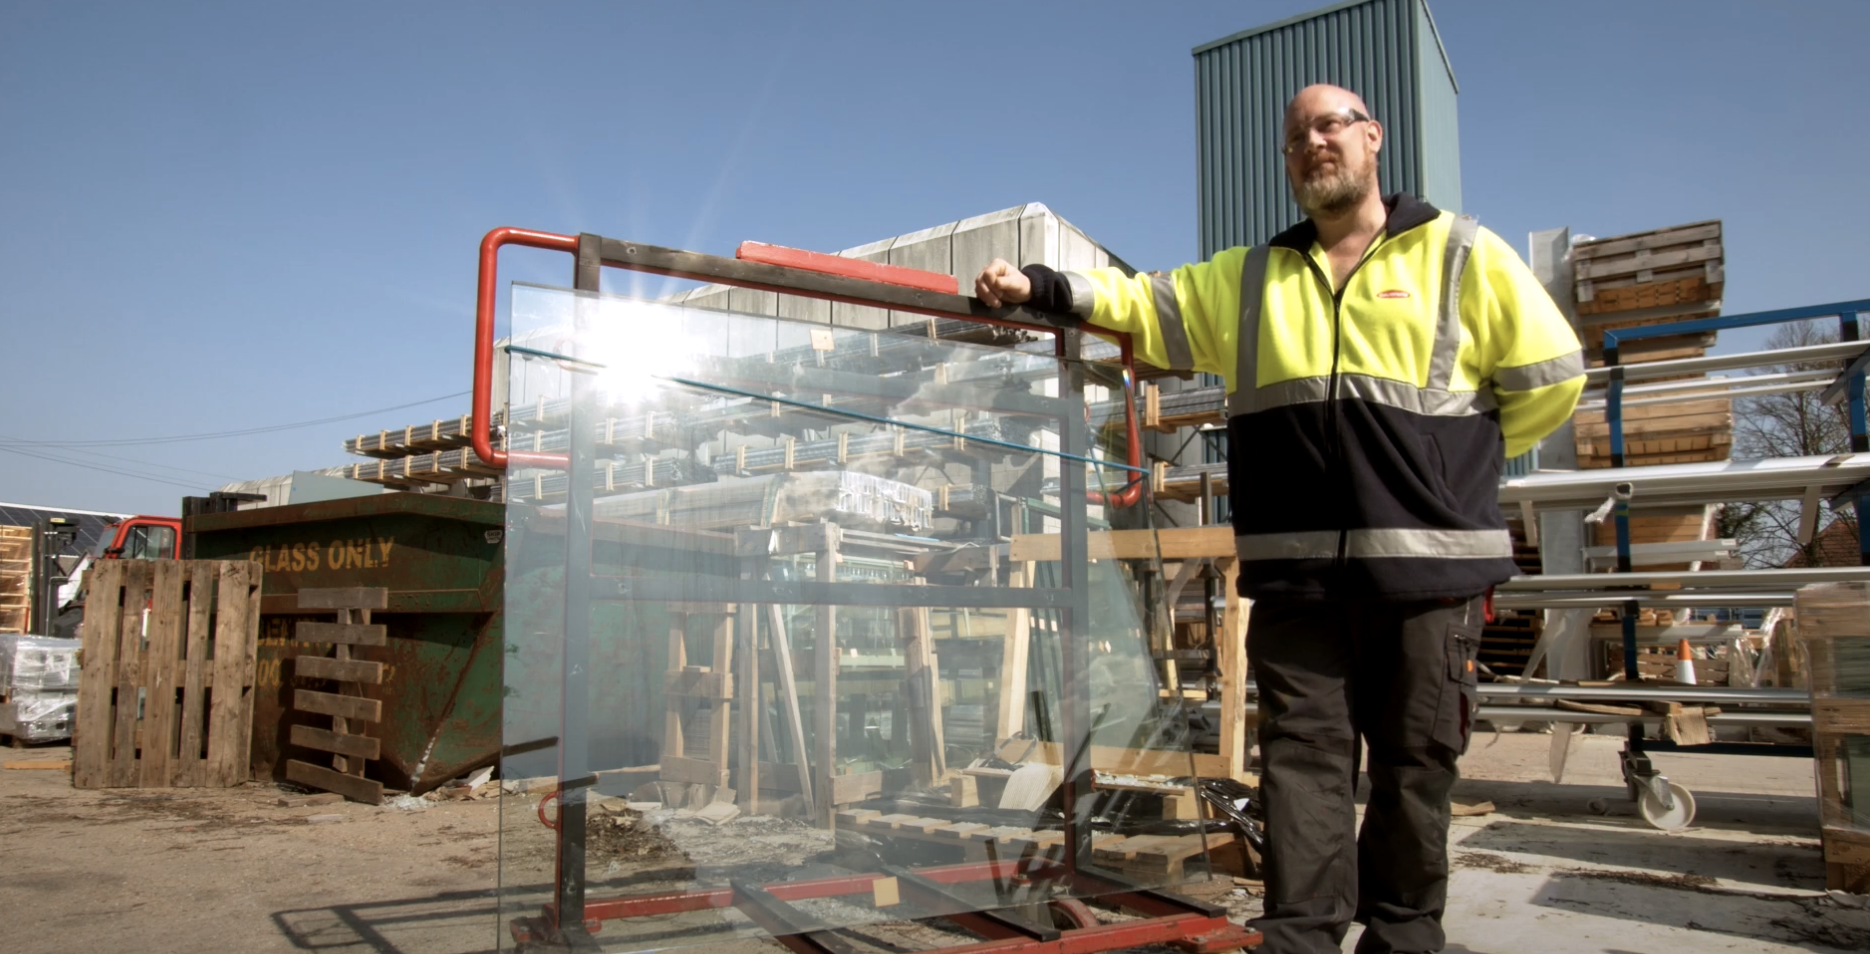 How Safe Is Laminated Glass… Let’s find out